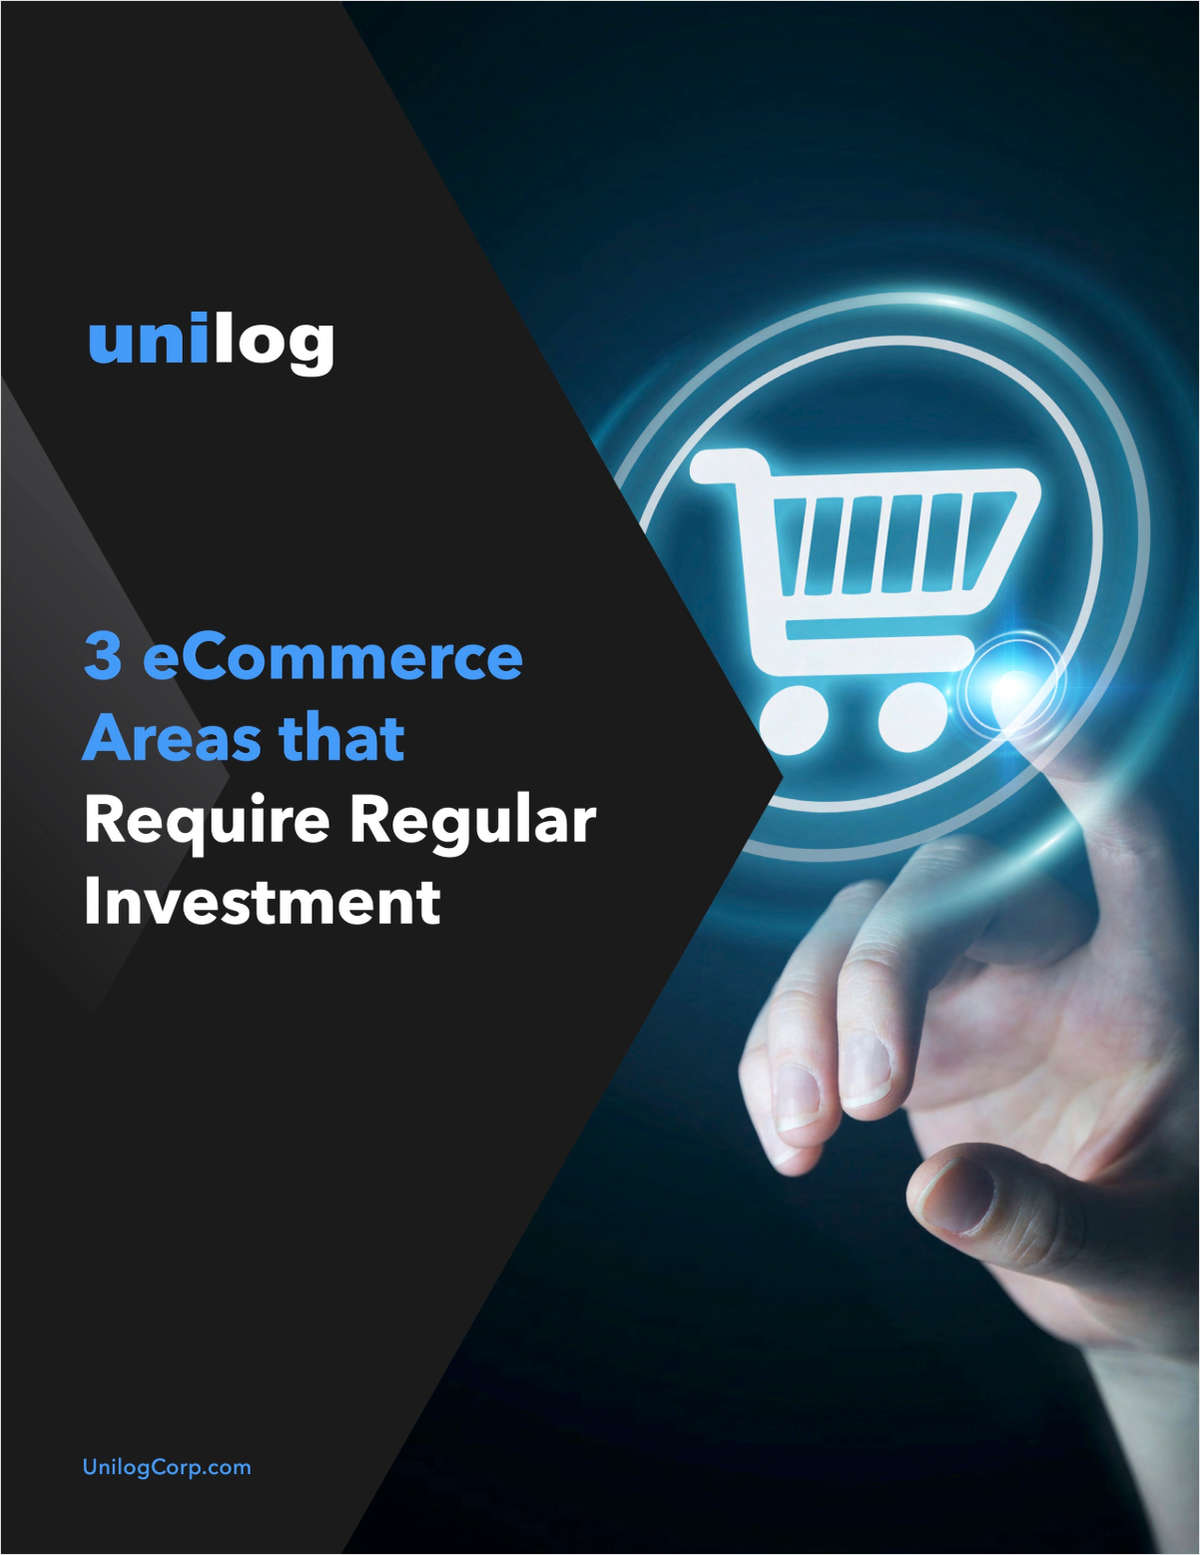 3 eCommerce Areas that Require Regular Investment